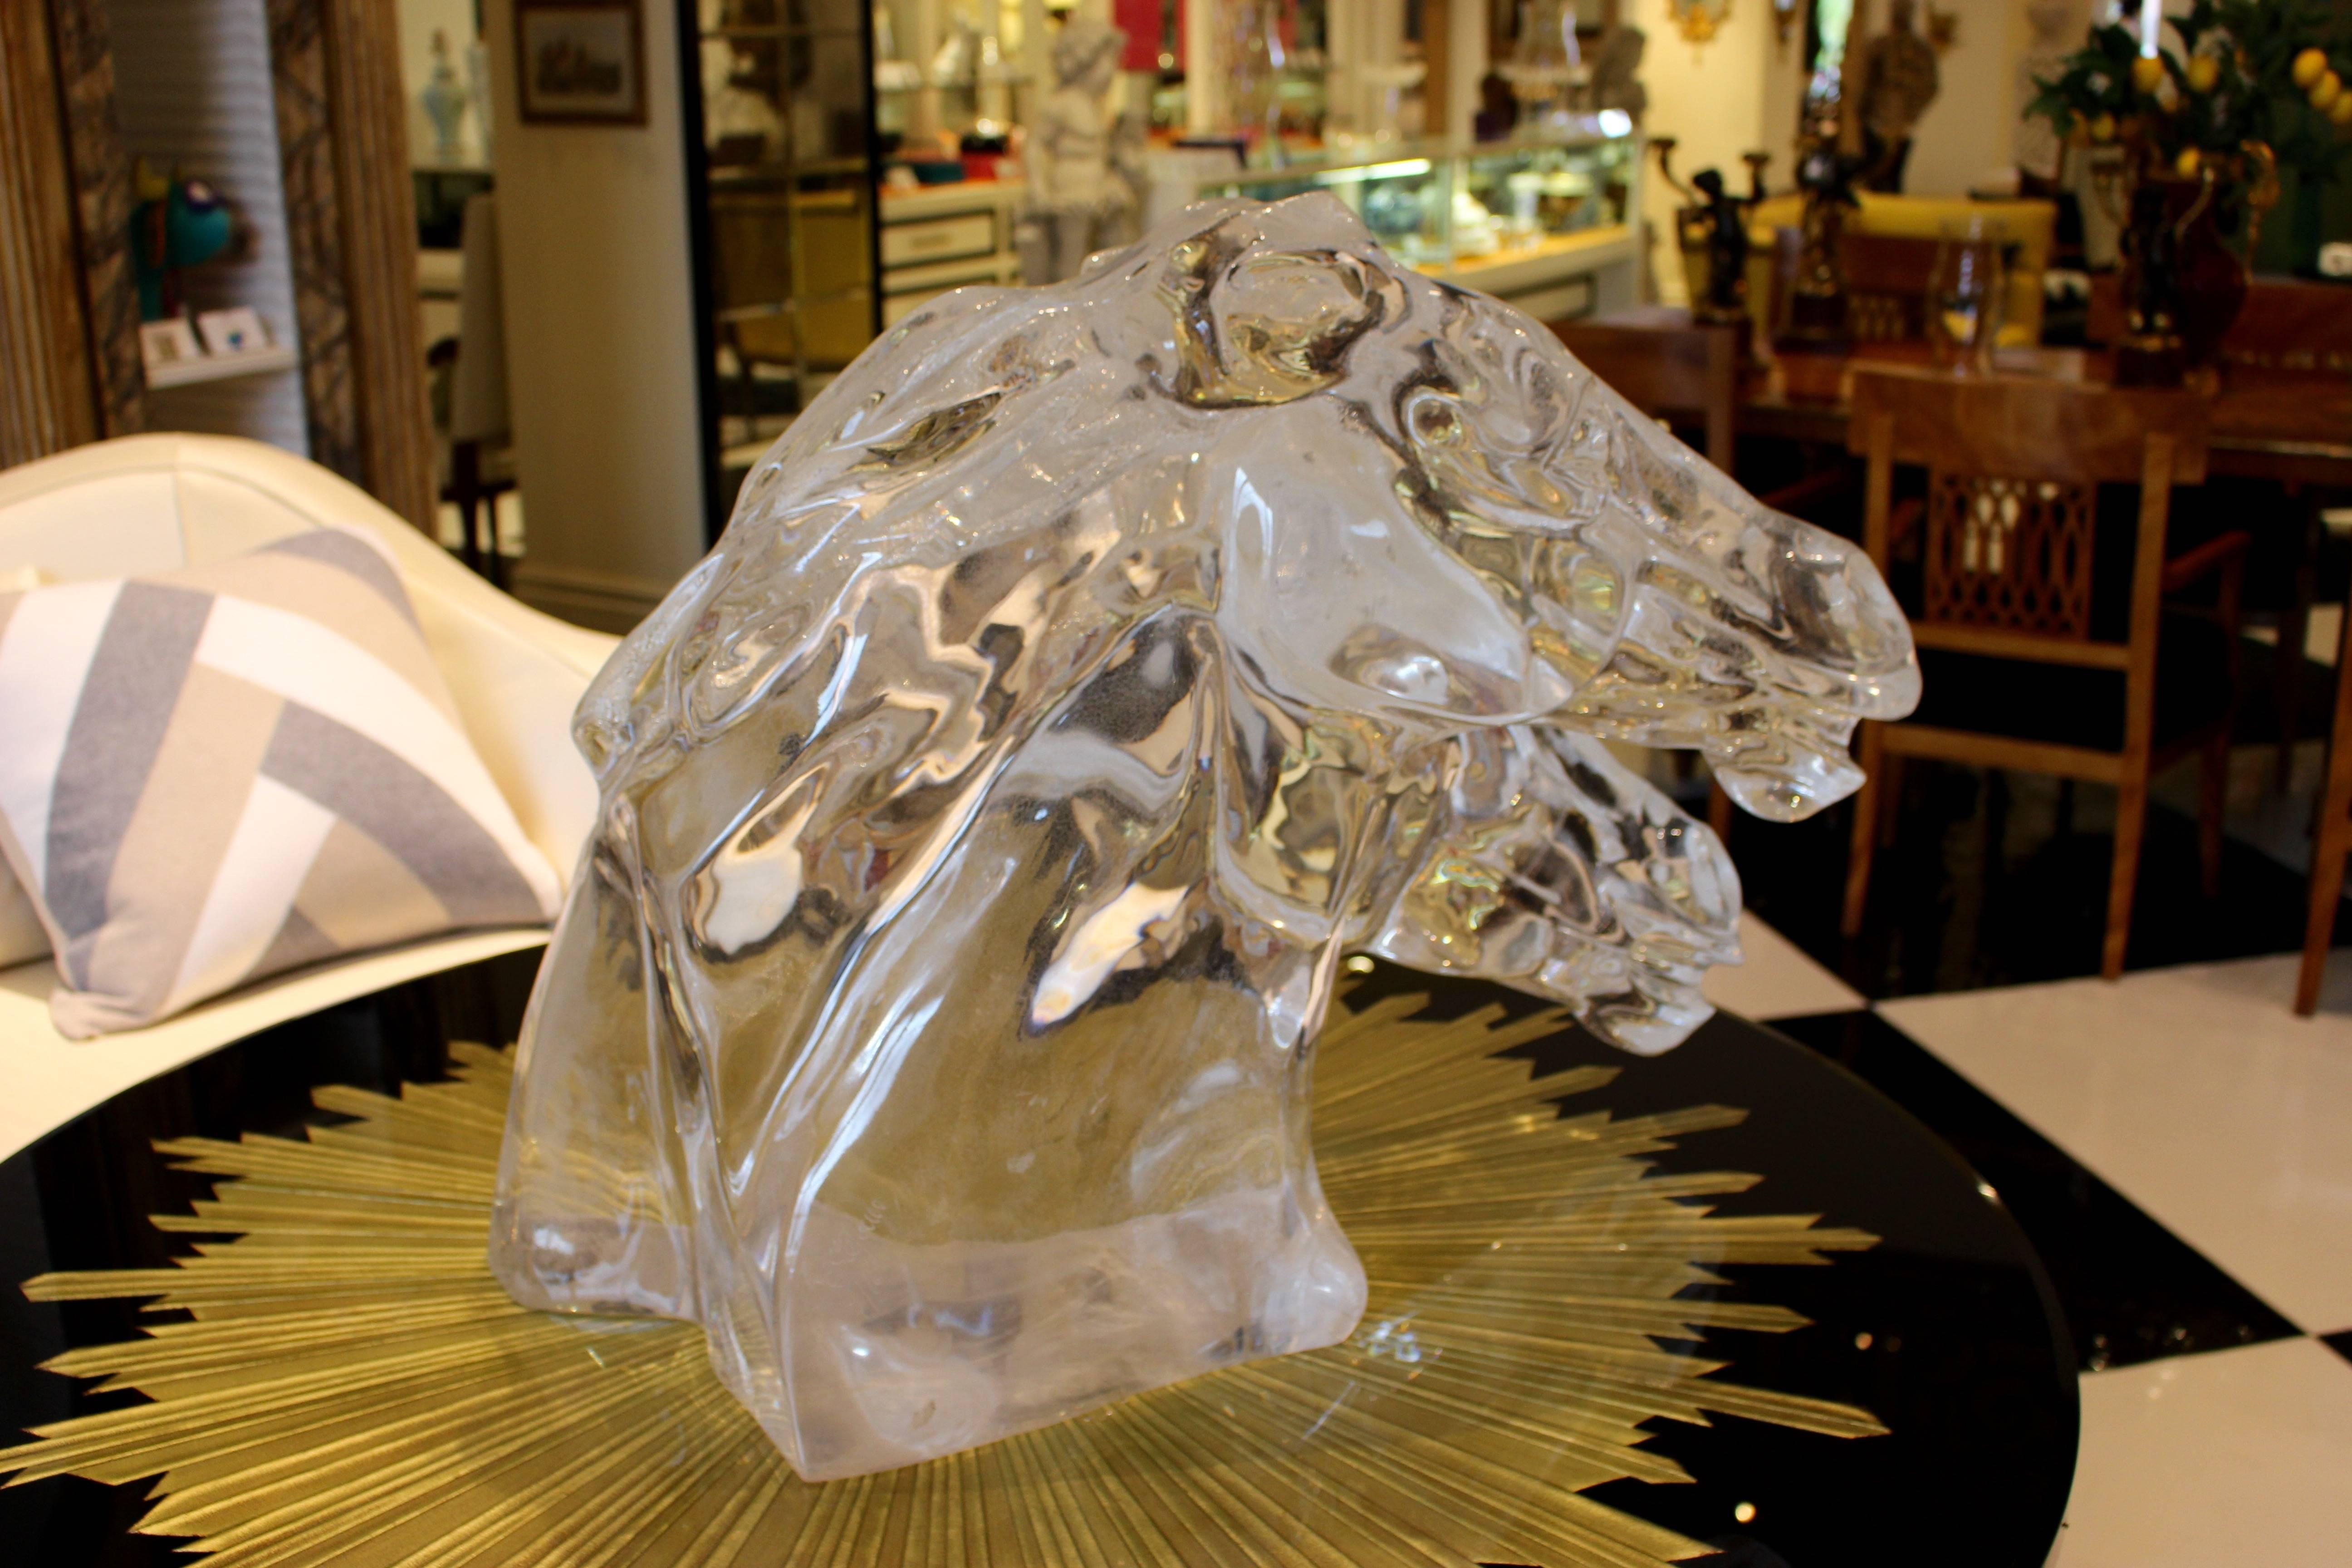 A 1970 Lucite double horse head sculpture signed by the Italian artist Deste Jomco. This impressive sculpture depicts two unbridled horse heads, side by side with flowing manes, one overhanging the other with the mouth slightly open, as if